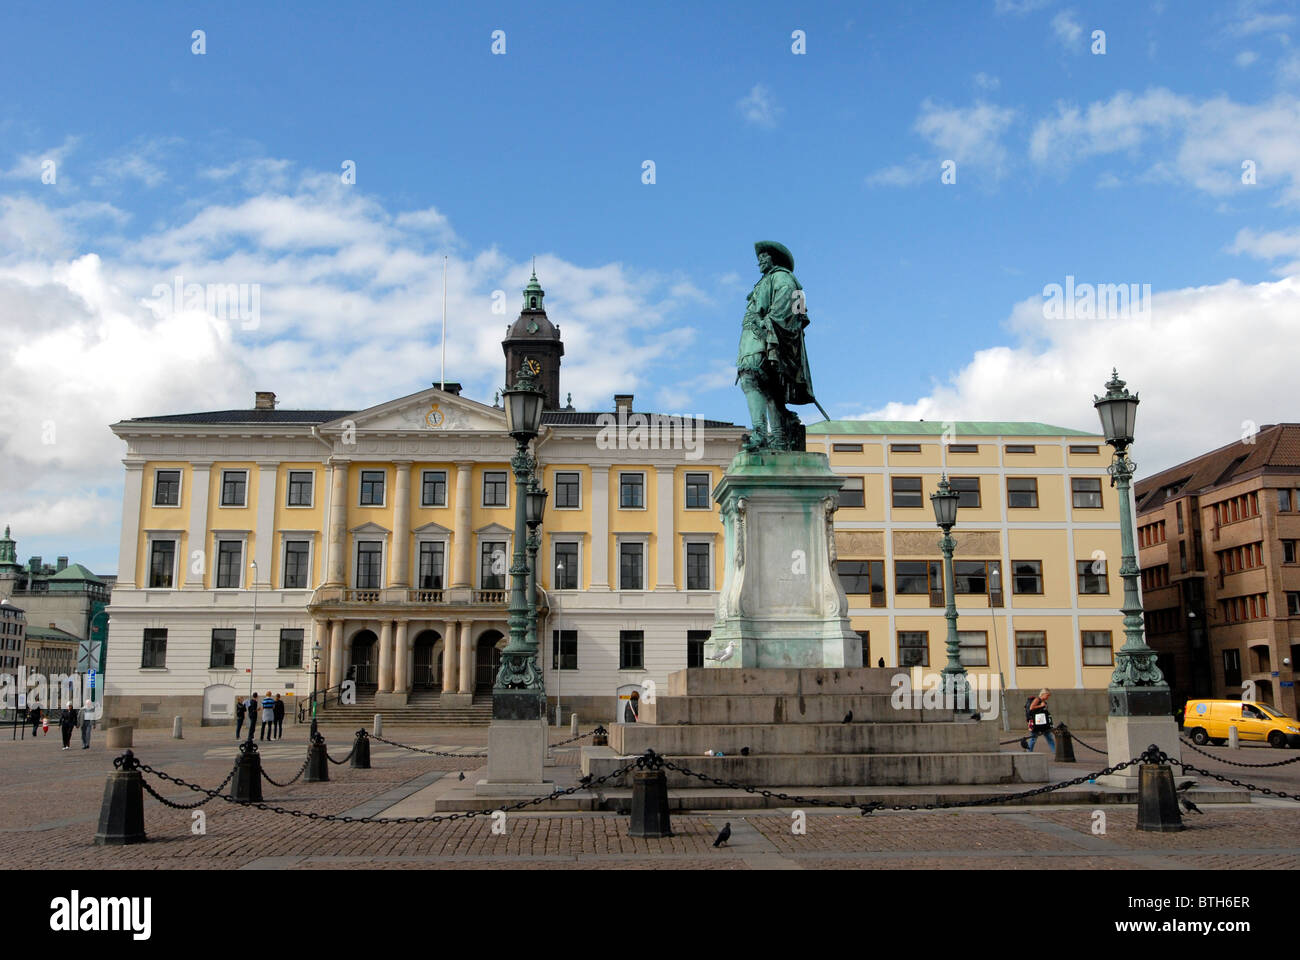 The statue of Gustavus Adolphus in Gothenburg Sweden iwith the Town Hall Stock Photo